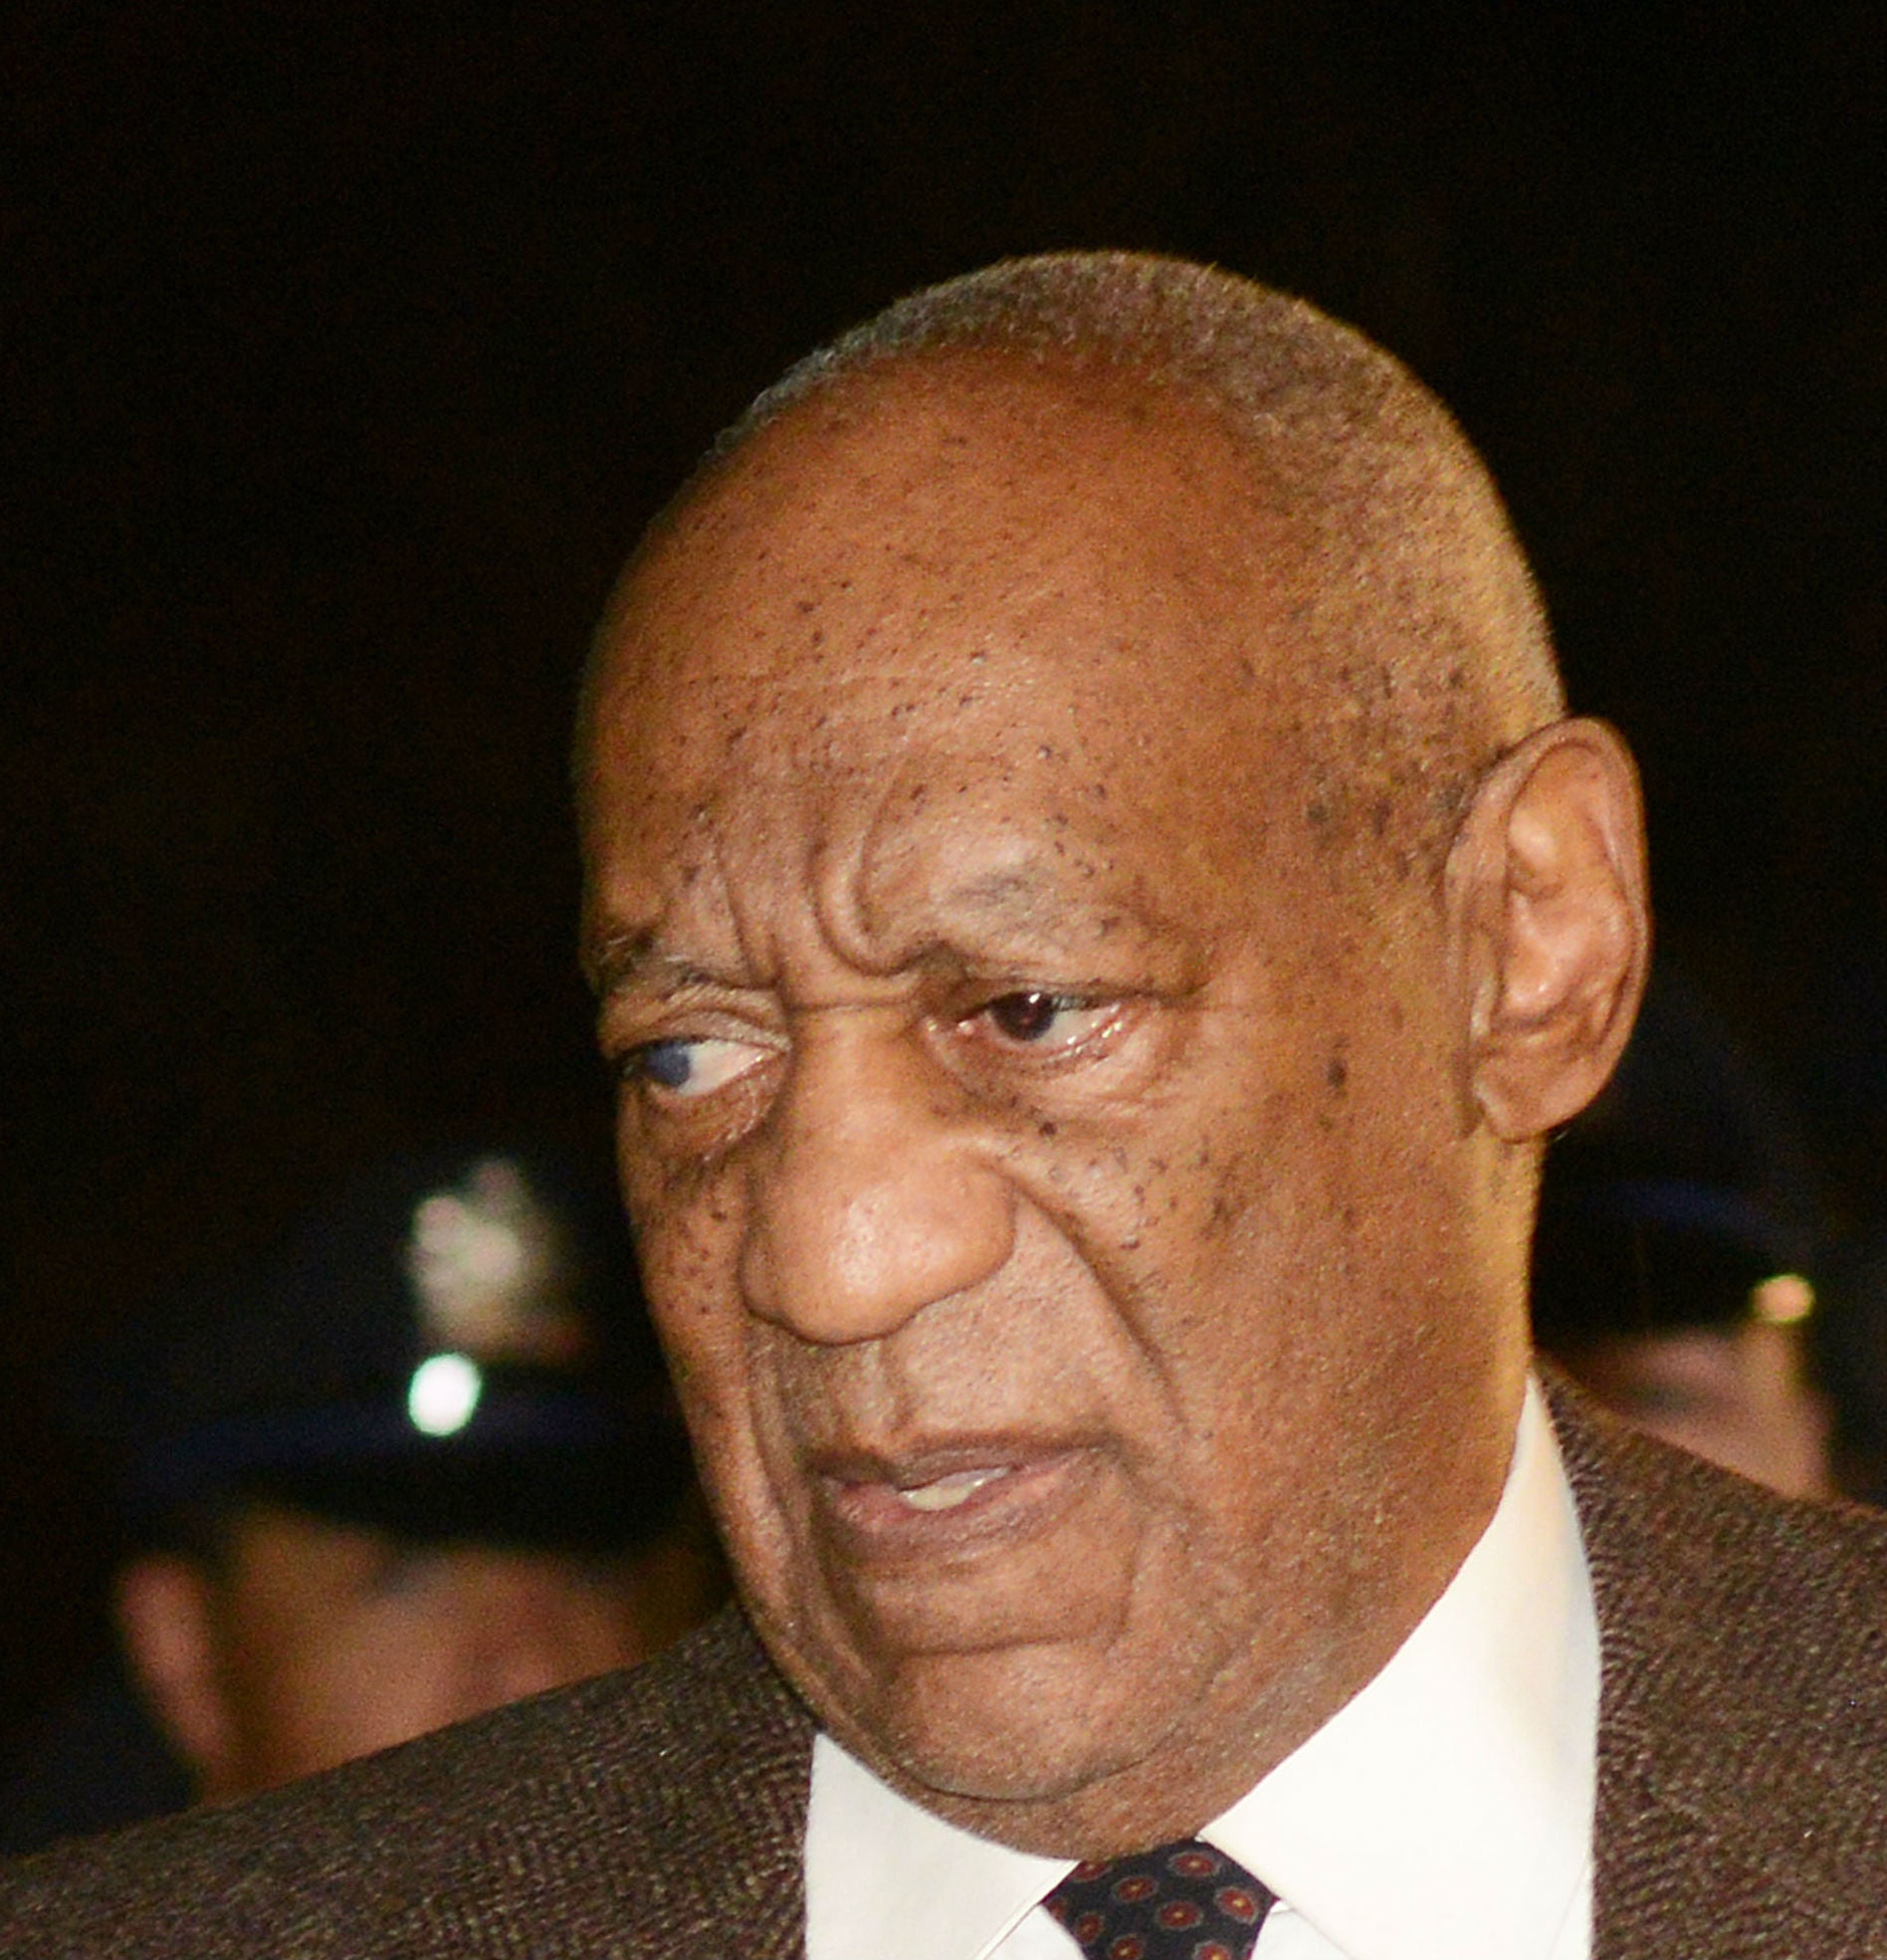 Mr Cosby, 78, has been accused of sexual crimes by at least 50 women